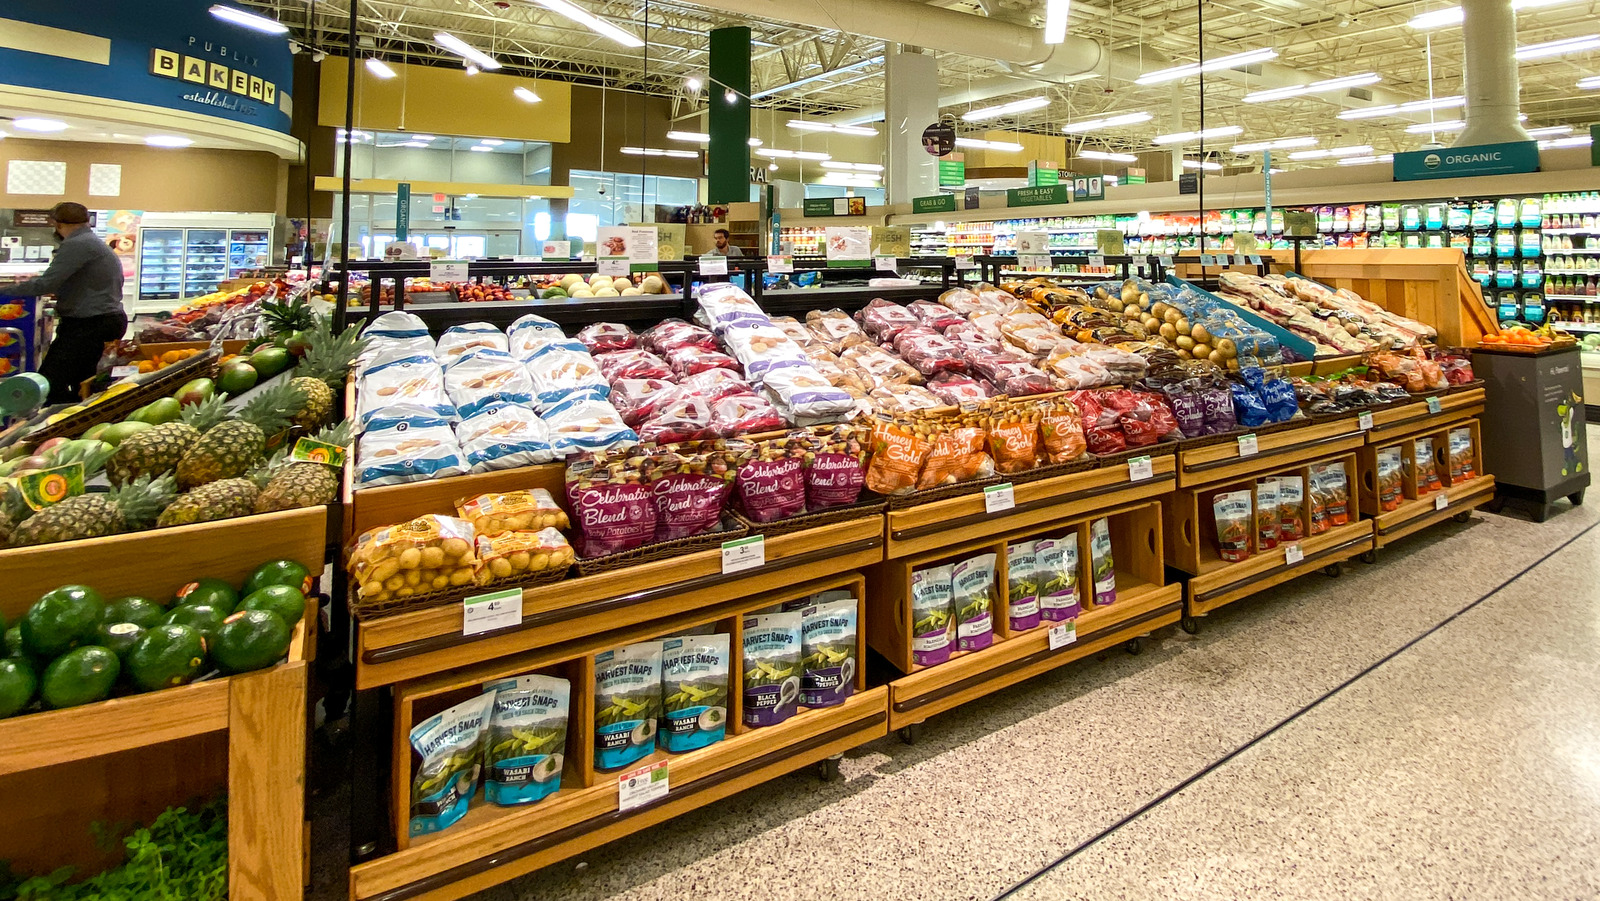 Buy Harvest Snaps Products at Whole Foods Market